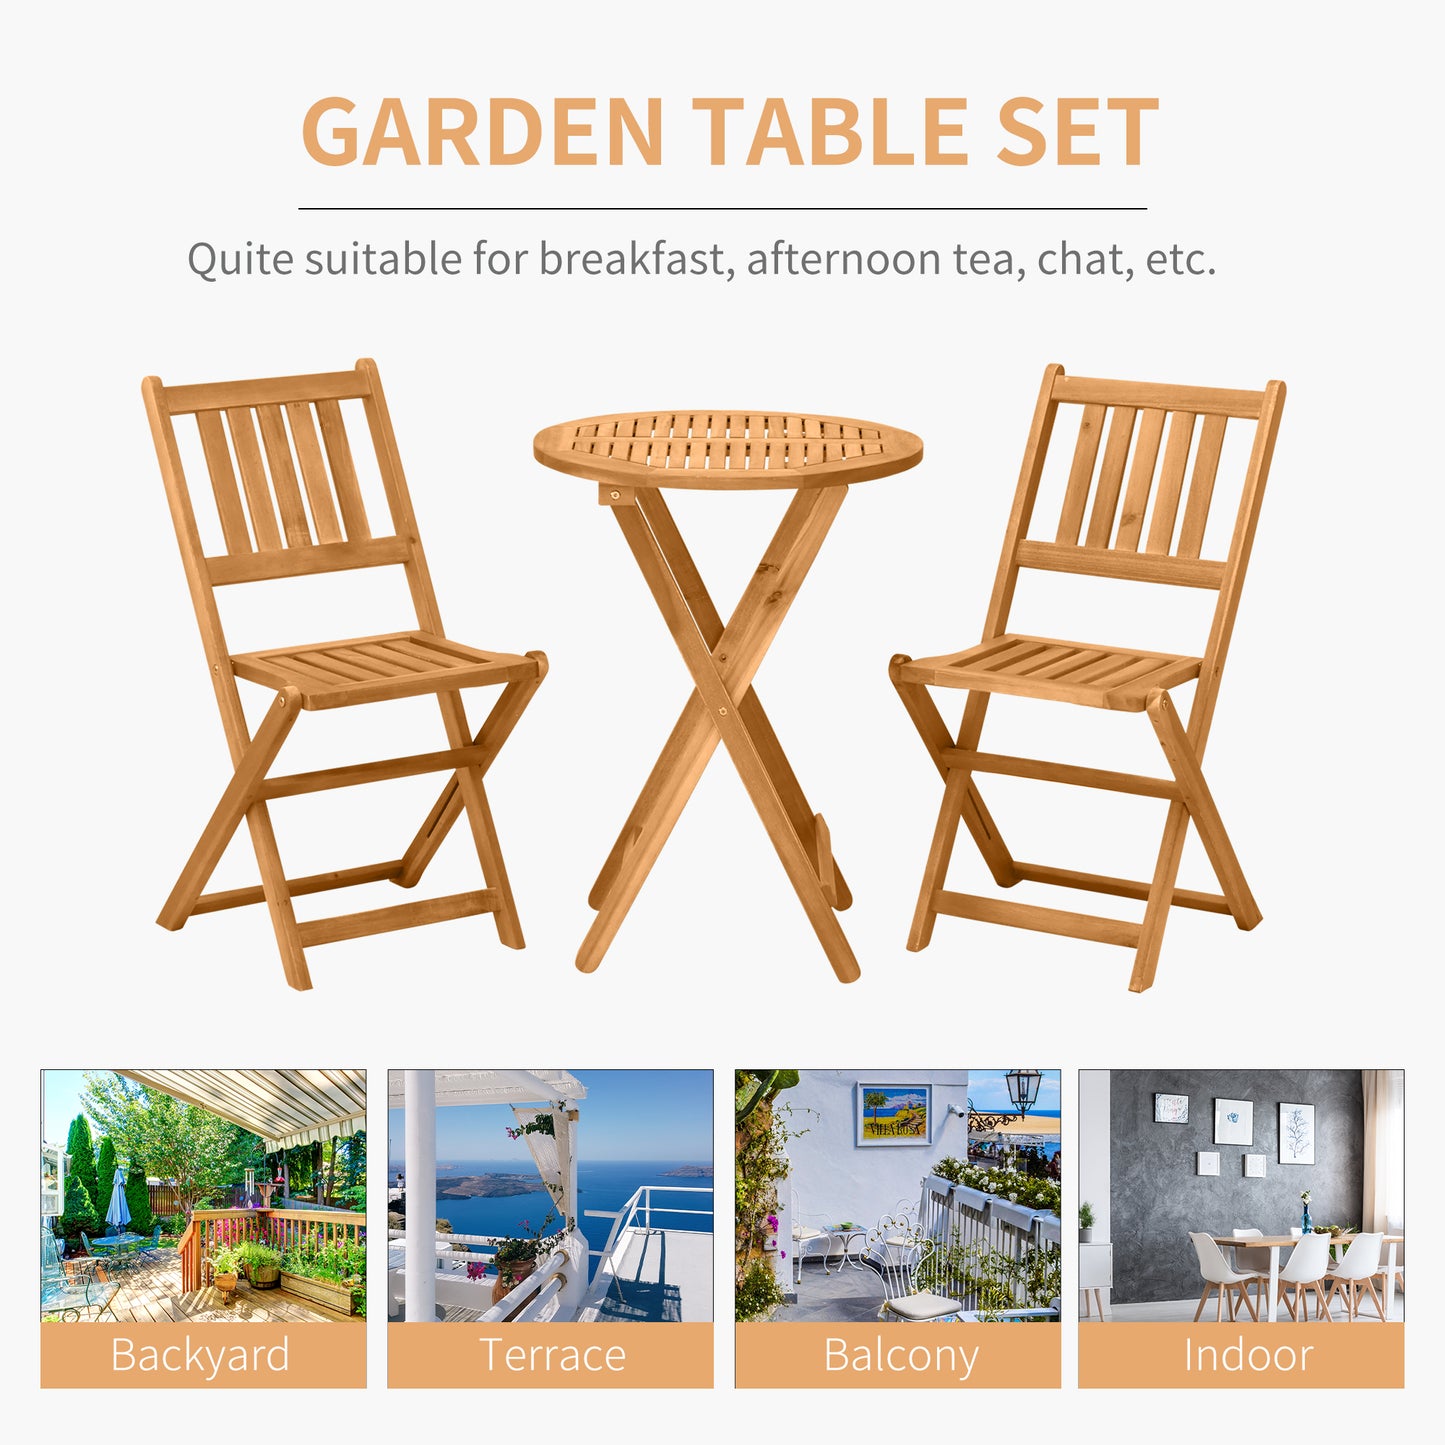 Outsunny 3 Piece Folding Bistro Set, Wooden Garden Table and Chairs for Outdoor, Patio, Yard, Porch, Teak